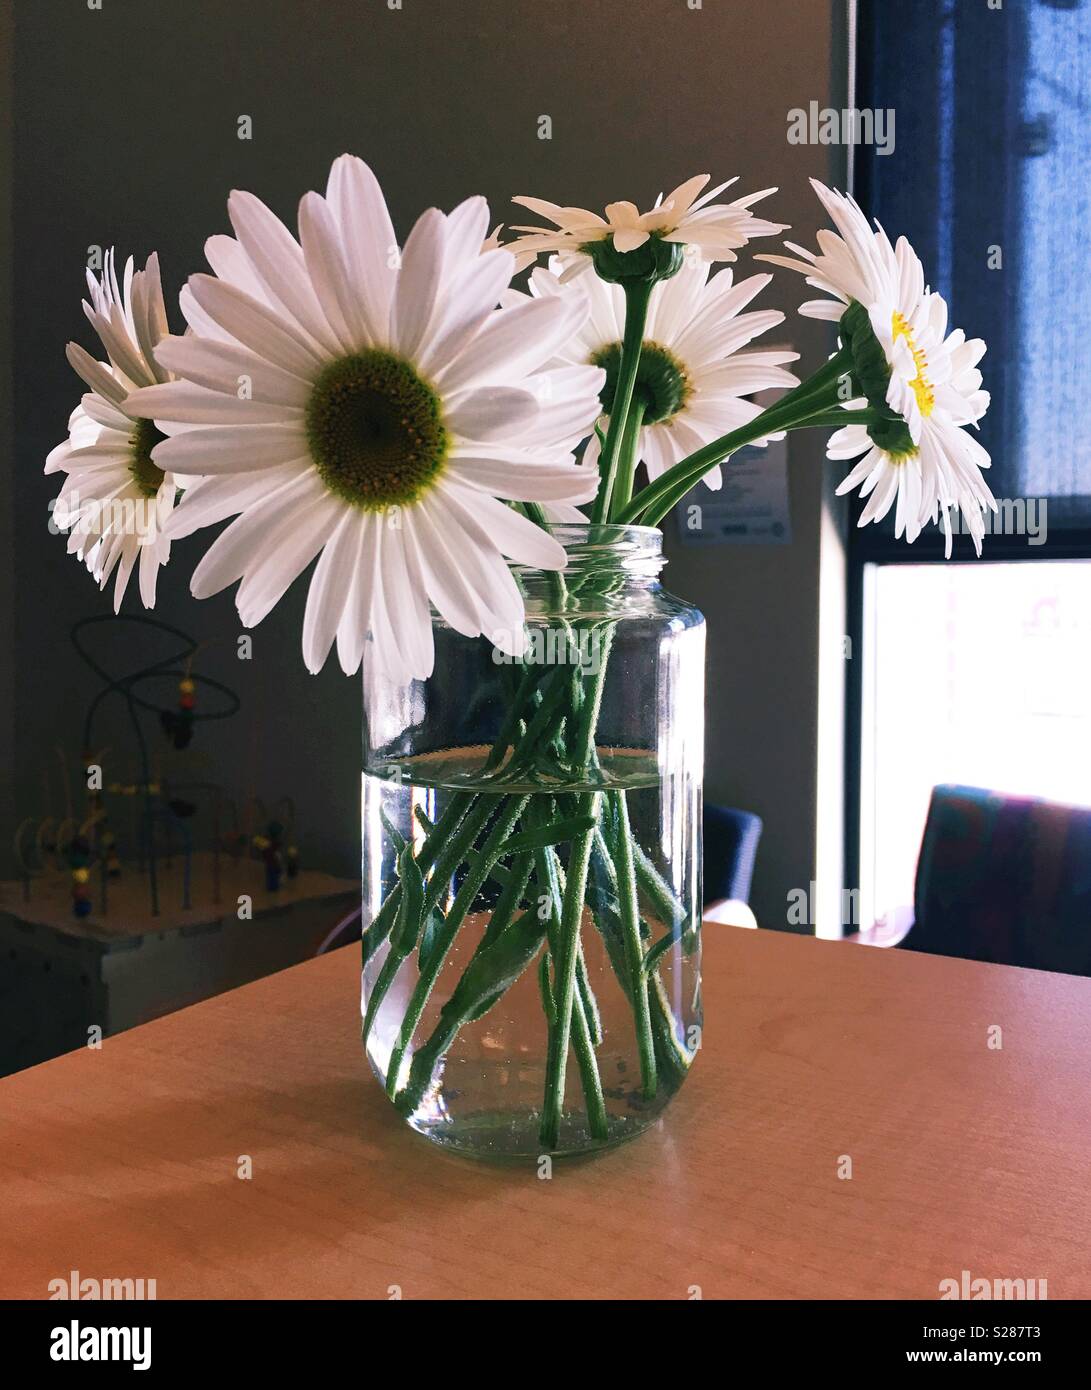 A jar of daisies on a counter. Stock Photo